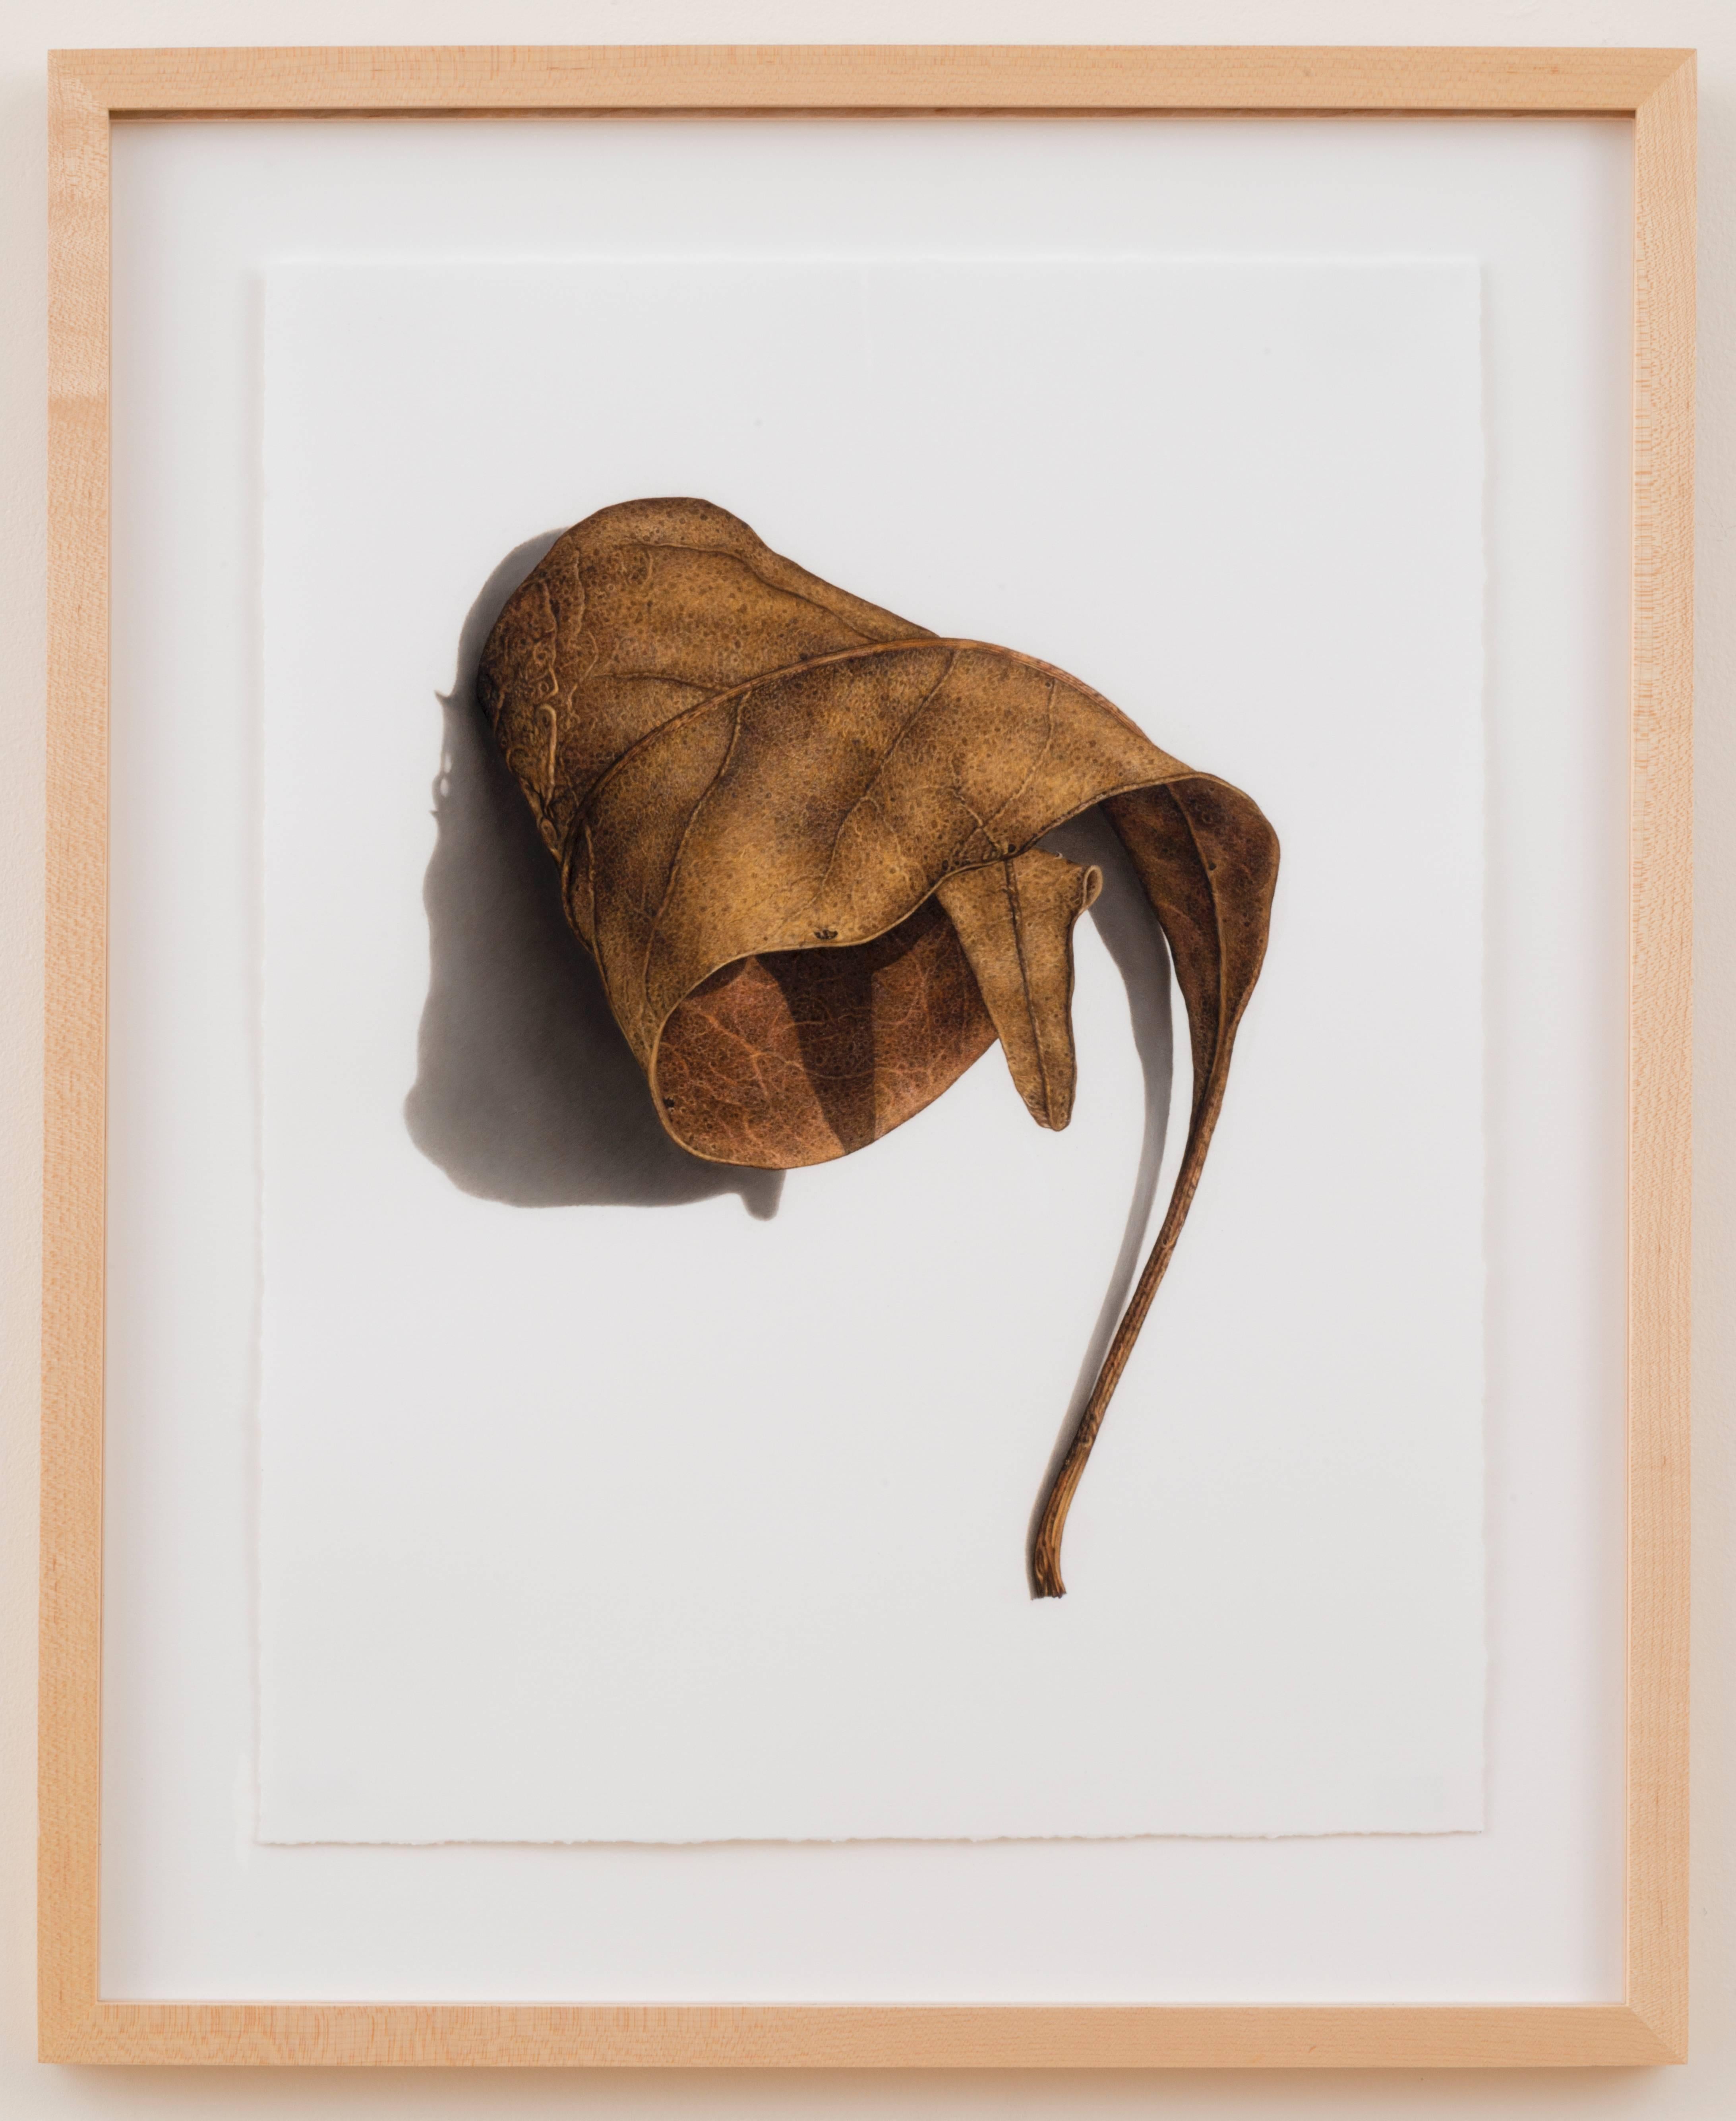 Working in colored pencil on paper, David Morrison studies objects from nature at the very end of their useful life, highlighting its wondrous natural markings, flaws and decay. Morrison lives in Indiana, and many of the objects, such as leaves,